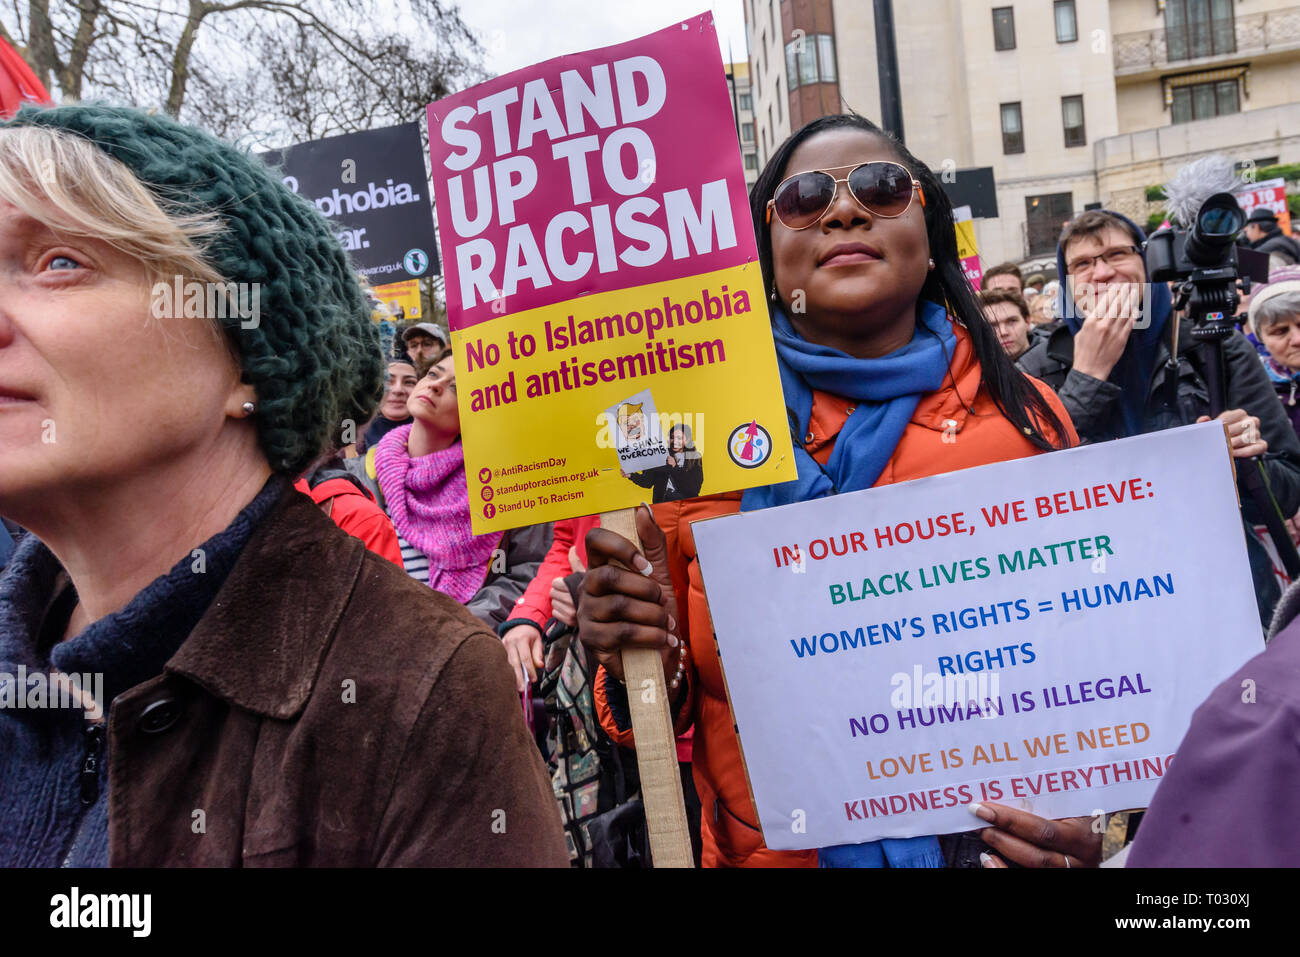 London, UK. 16th March 2019. Thousands march through London on UN Anti-Racism day to say 'No to Racism, No to Fascism' and that 'Refugees Are Welcome Here', to show solidarity with the victims of racist attacks including yesterdays Christchurch mosque attack and to oppose Islamophobic hate crimes and racist policies in the UK and elsewhere. The marchers met in Park Lane where there were a number of speeches before marching to a rally in Whitehall. Marches took place in other cities around the world including Glasgow and Cardiff. Peter Marshall/Alamy Live News Stock Photo